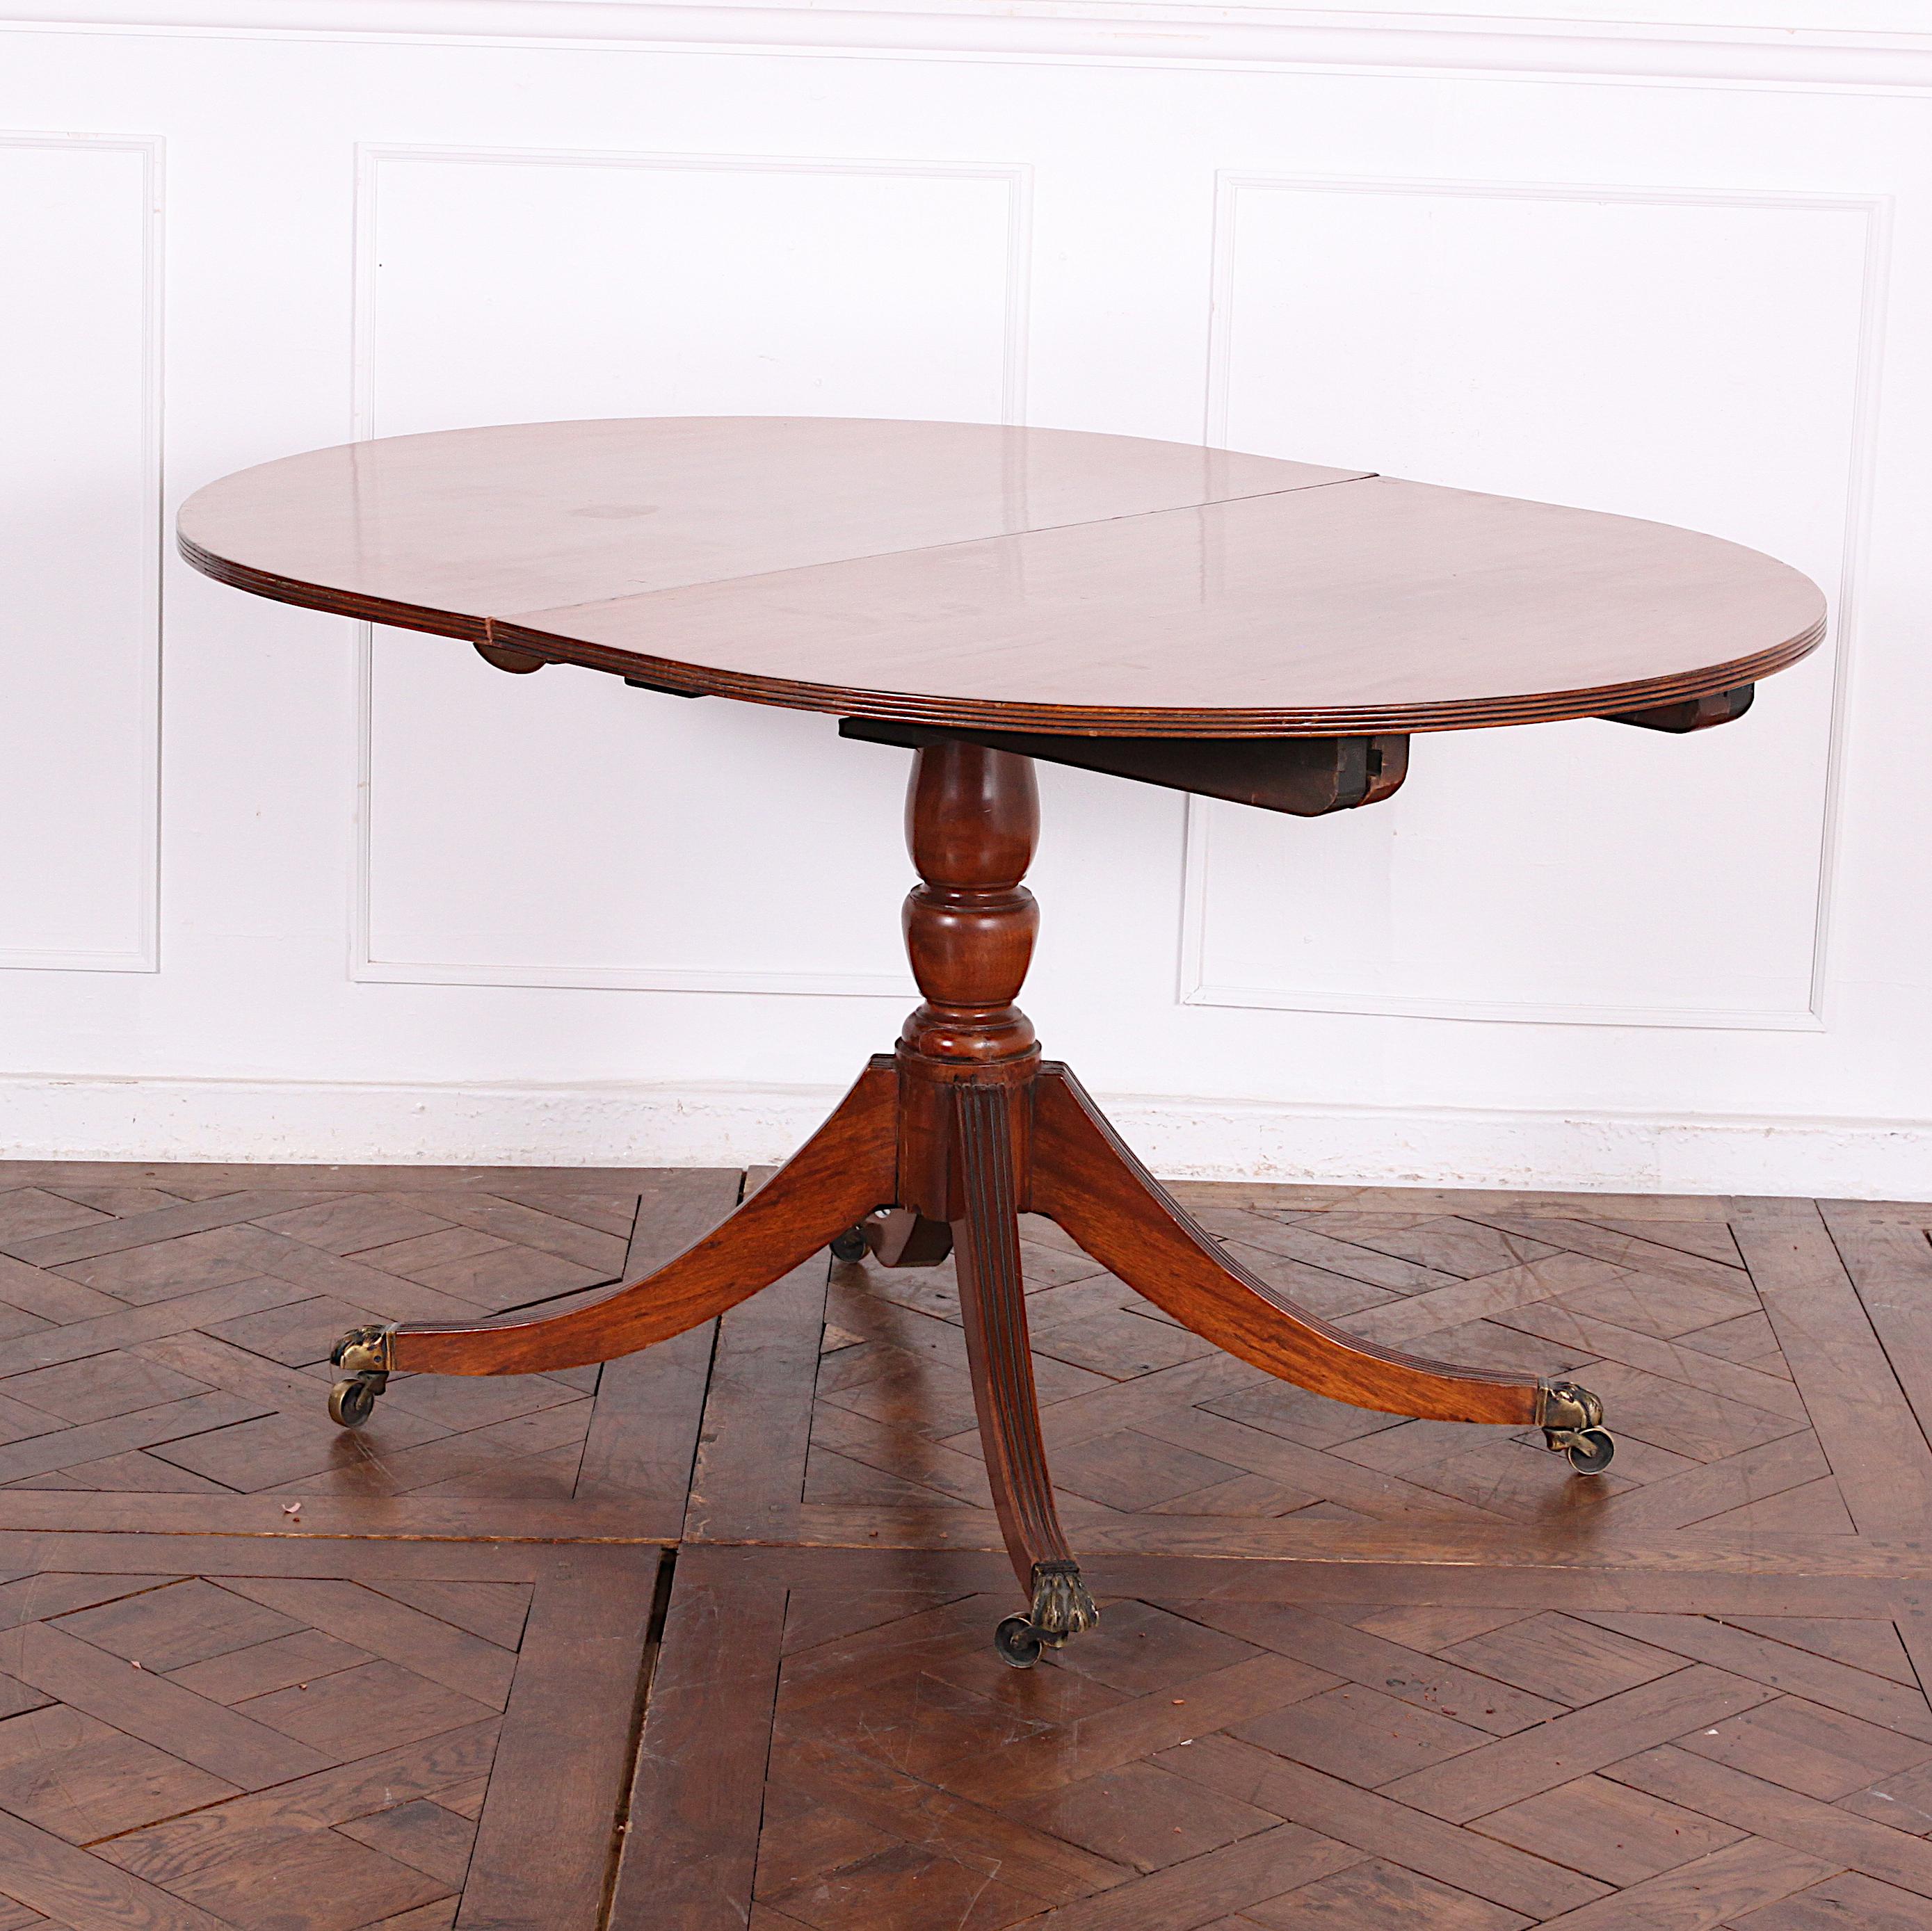 English Solid Mahogany Georgian Revival Single Pedestal Dining Table In Good Condition For Sale In Vancouver, British Columbia